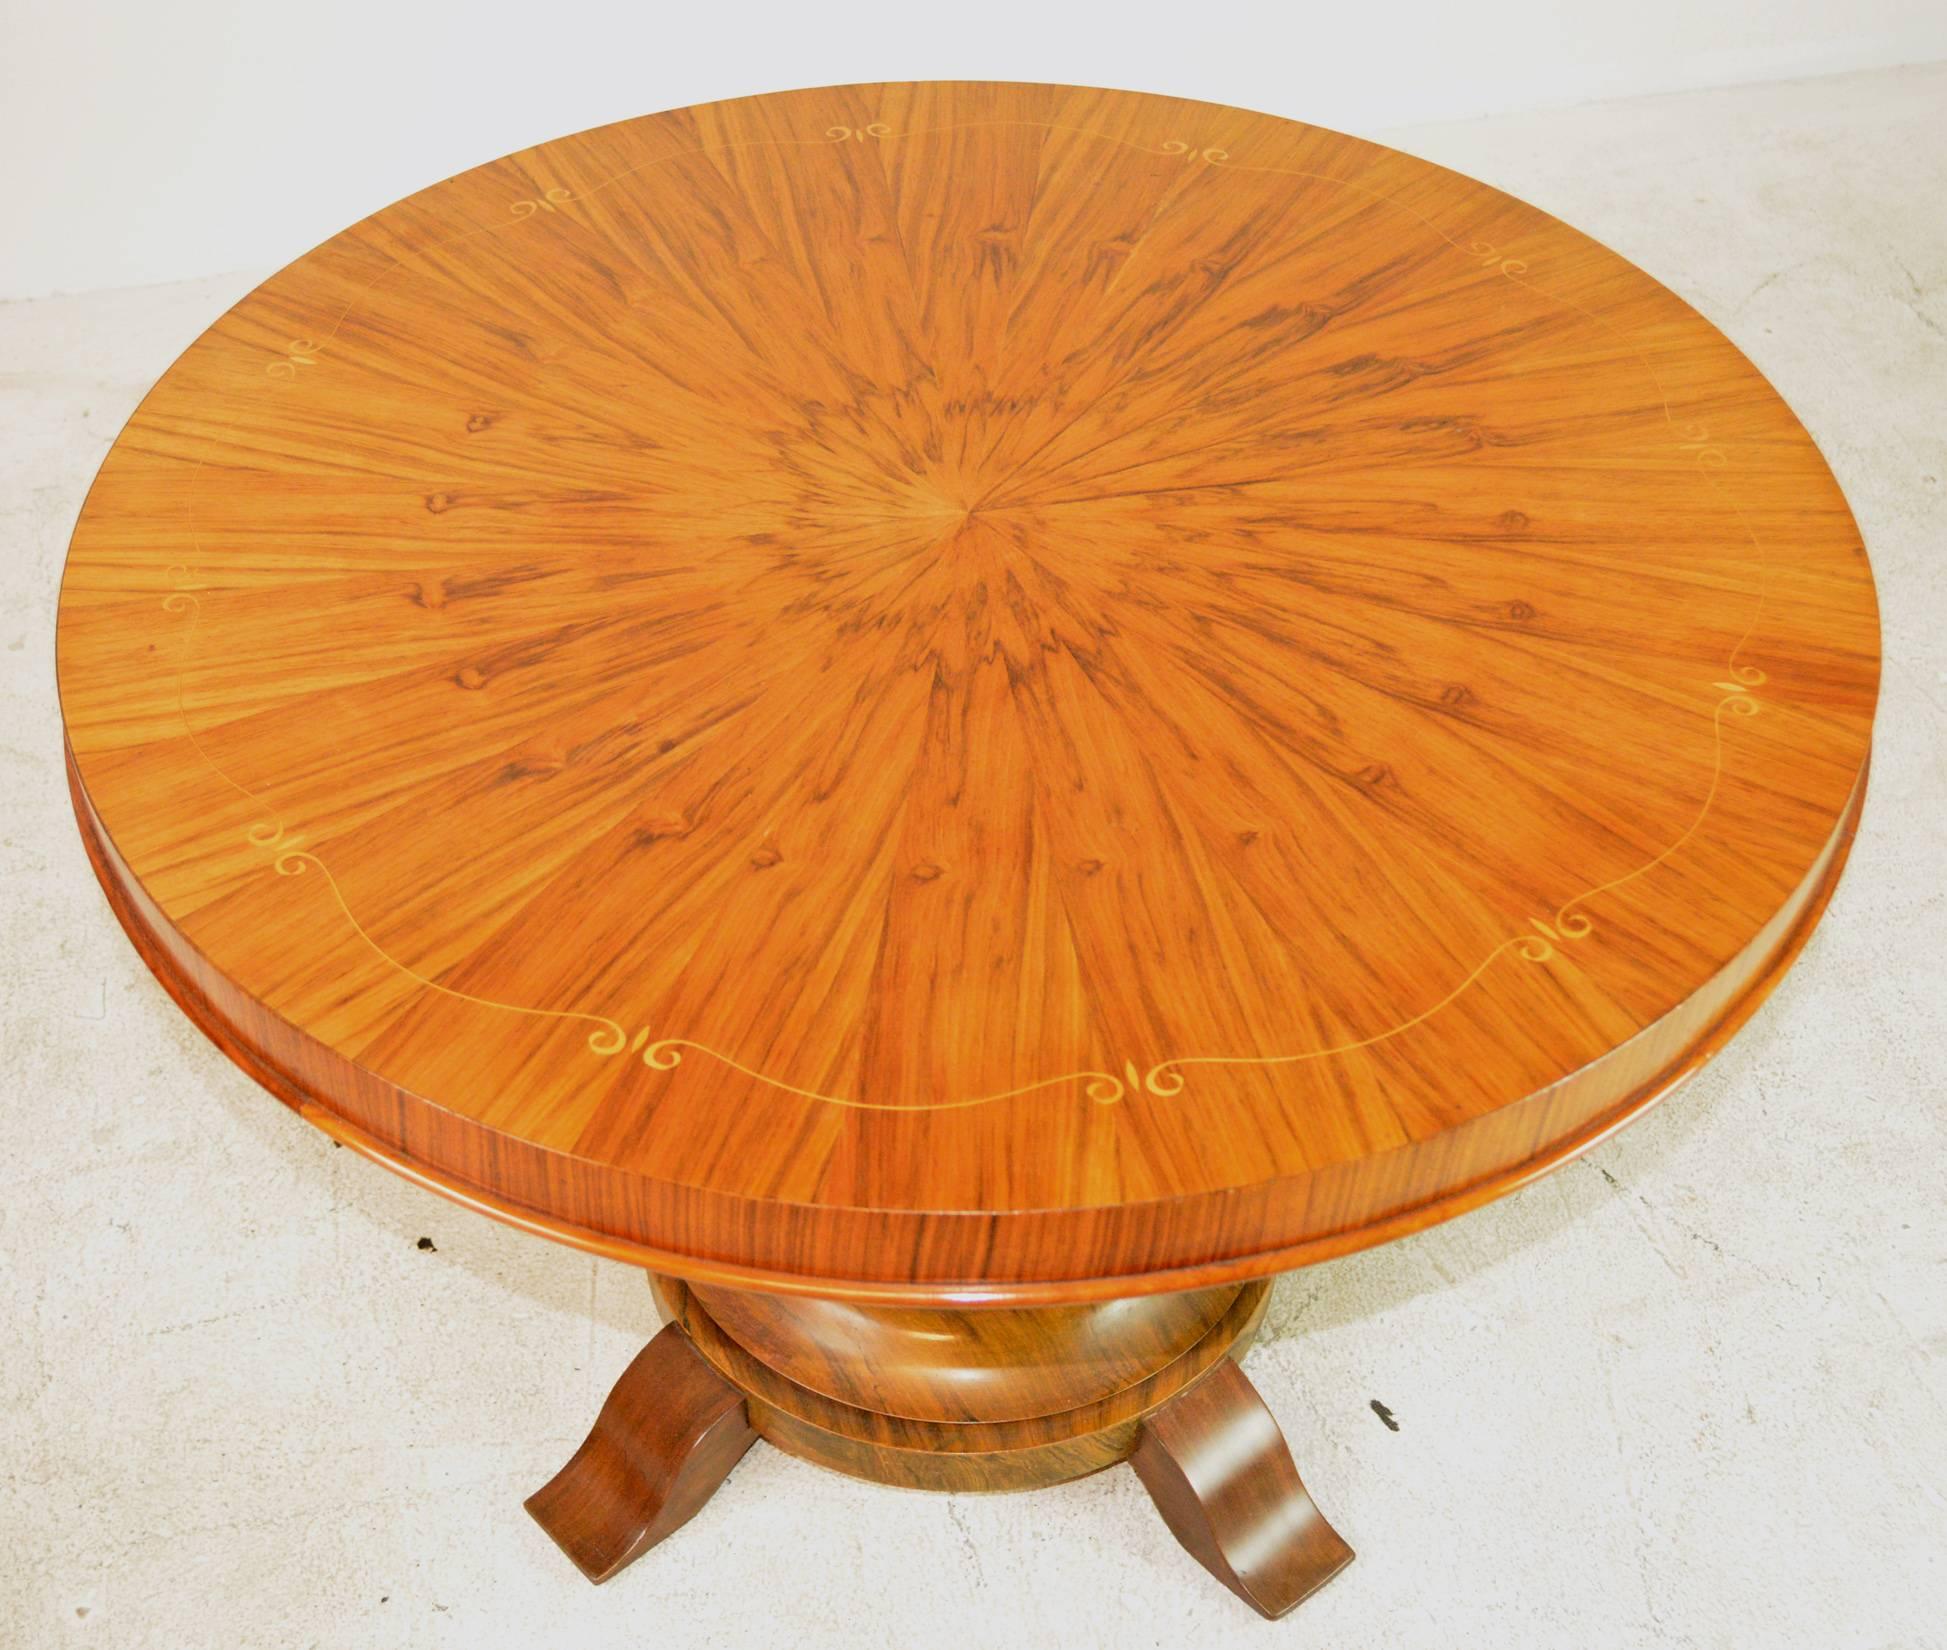 A French Art Deco occasional table with ribbon inlay on a radial veneer top in the style of Jules Leleu.